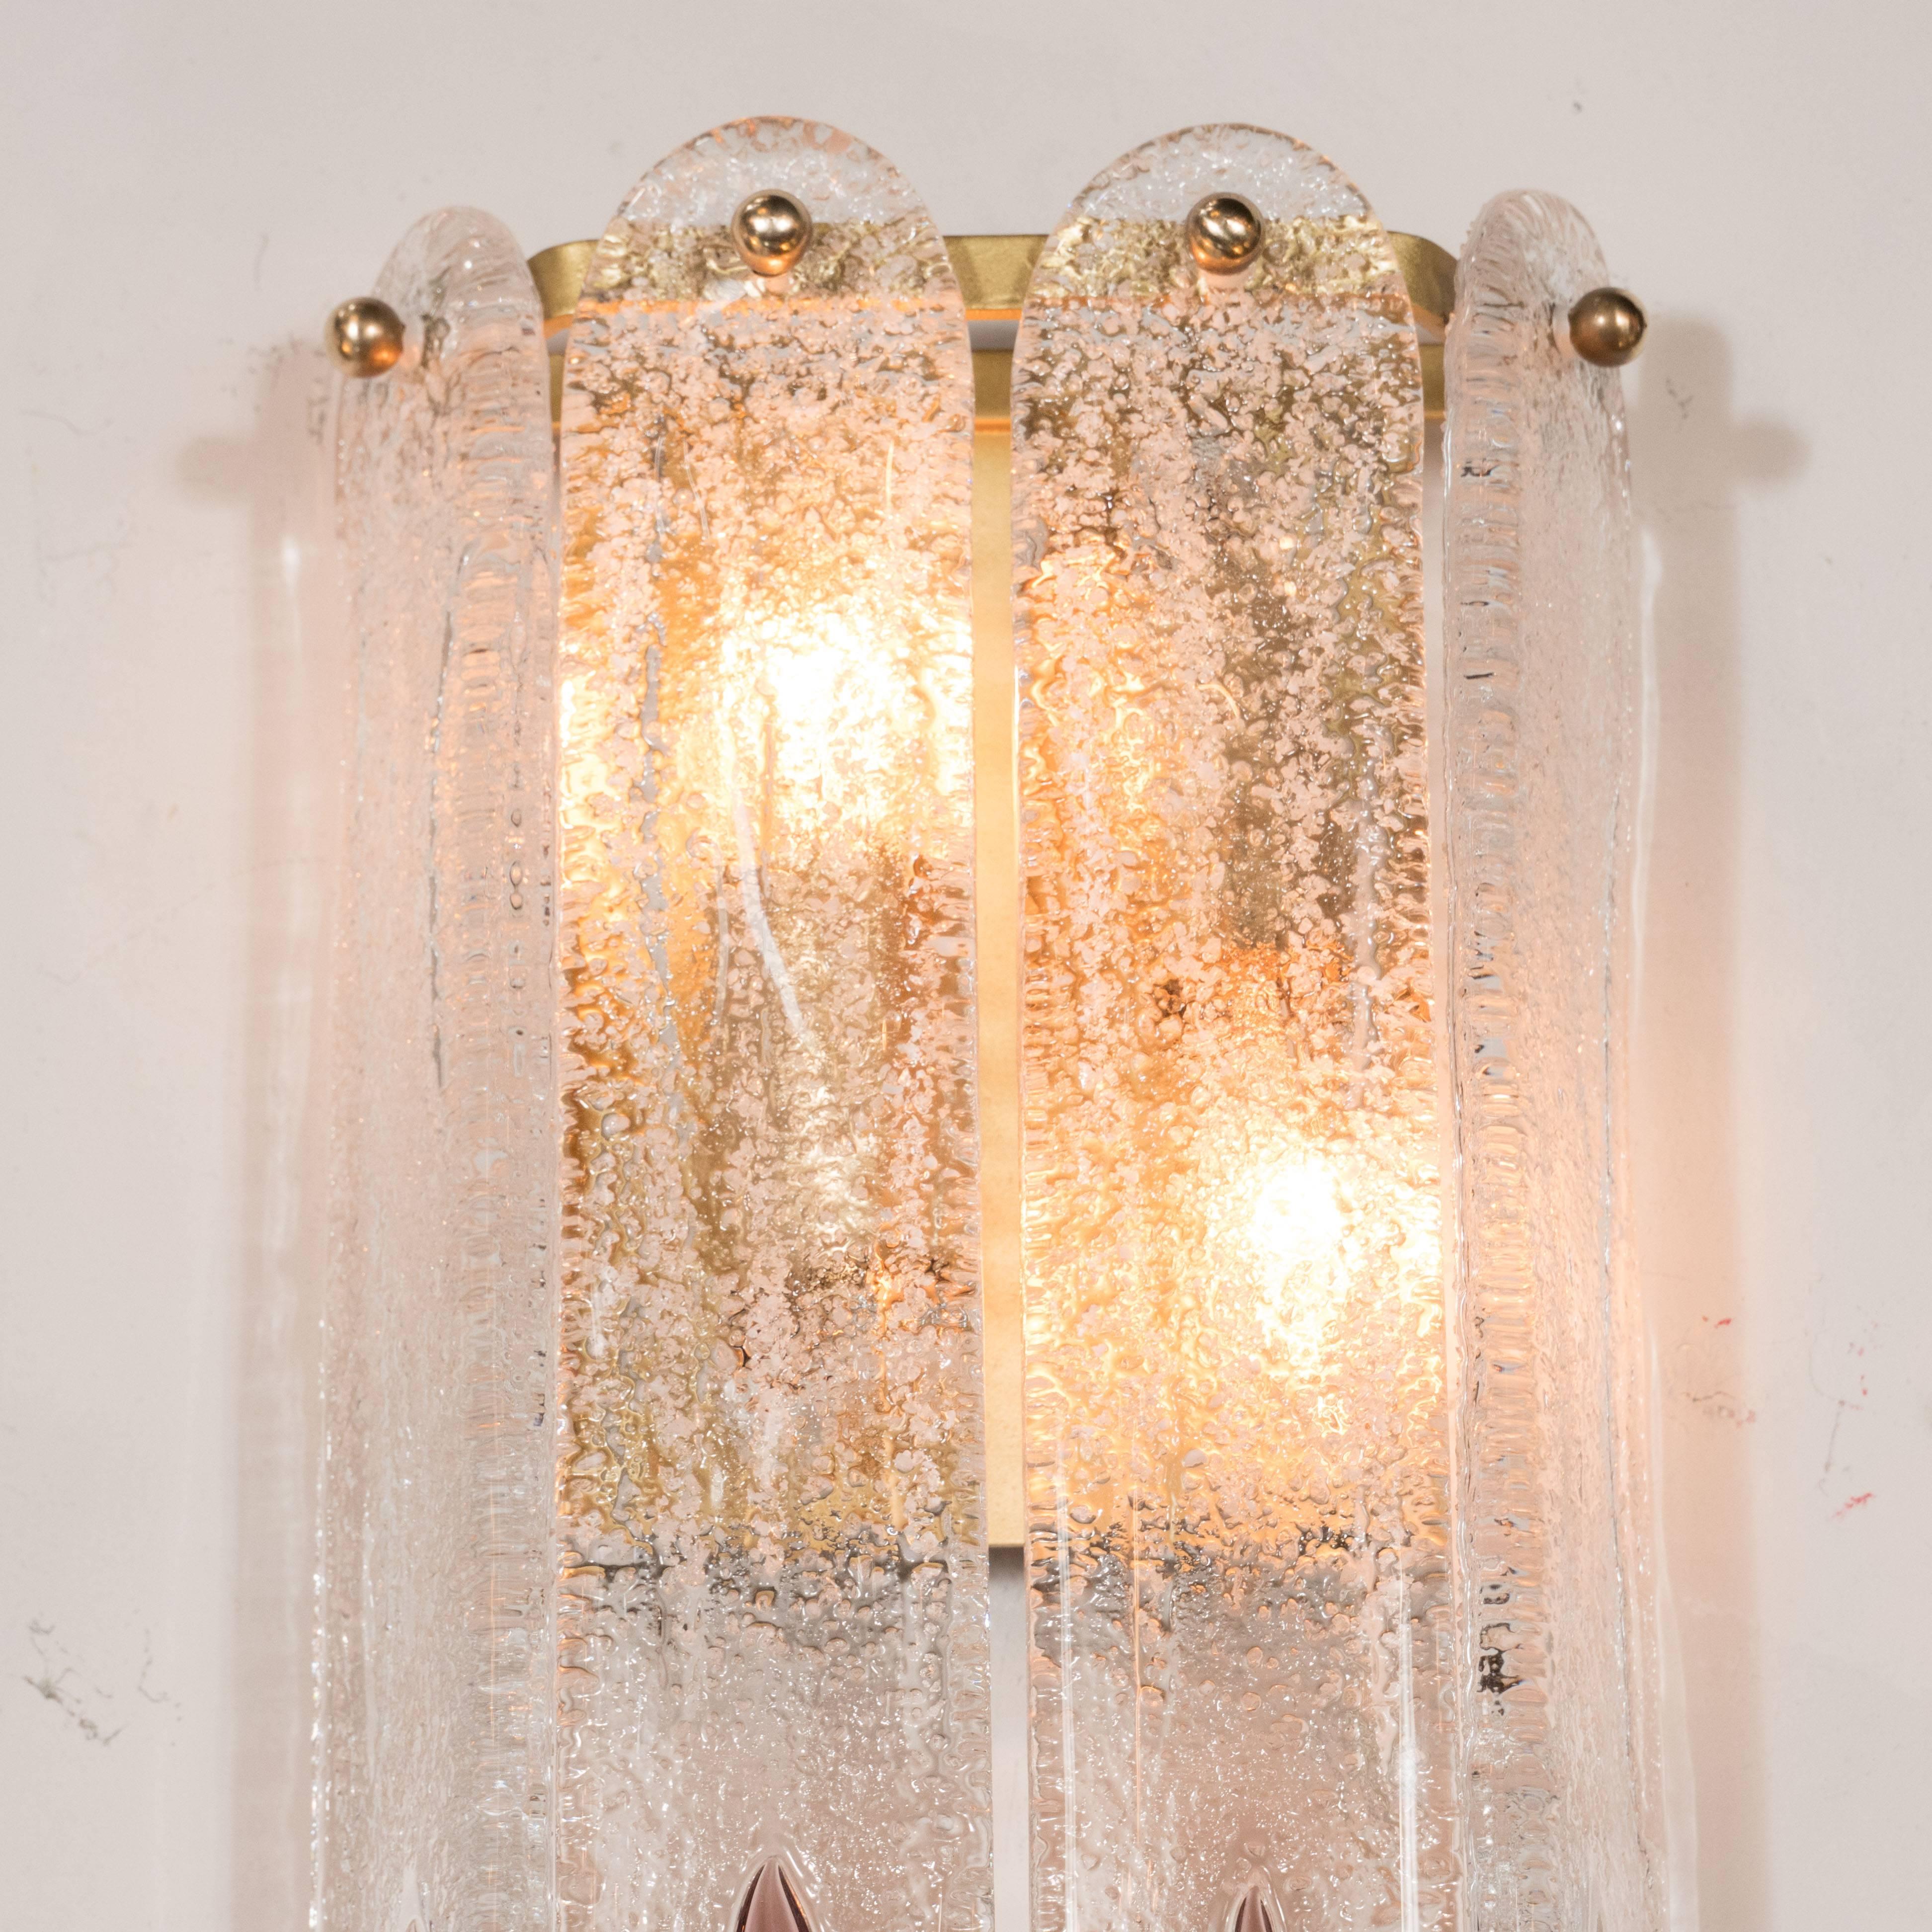 Mid-20th Century Mid-Century Modernist Mazzega Lilac Teardrop Sconces with Brass Fittings